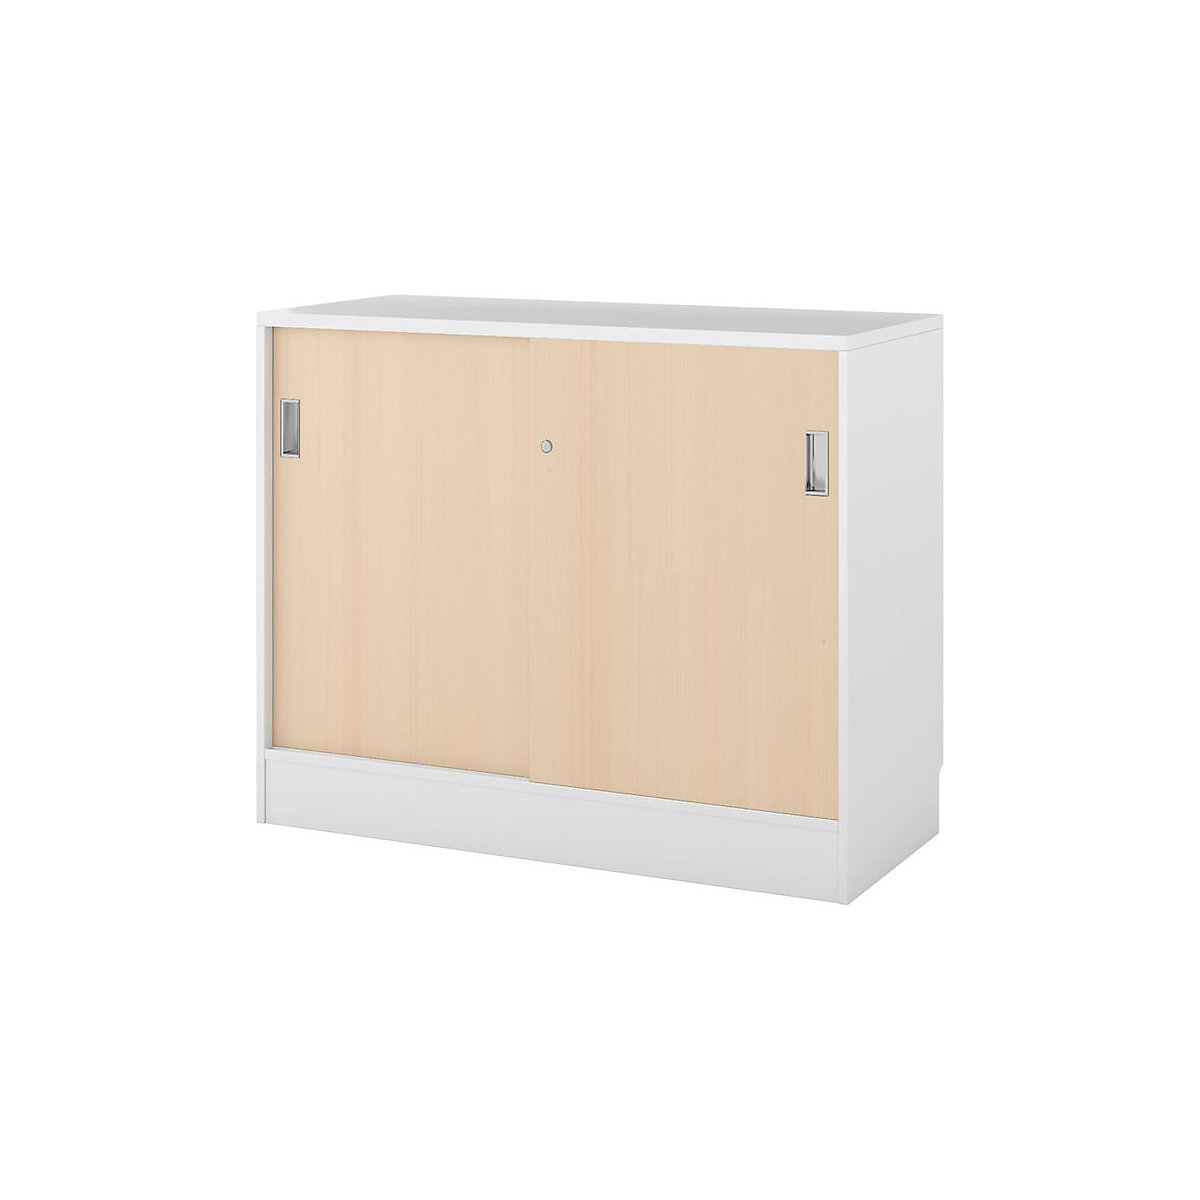 Chicago cupboard with sliding doors, HxWxD 948 x 1215 x 400 mm, brushed white / birch-4